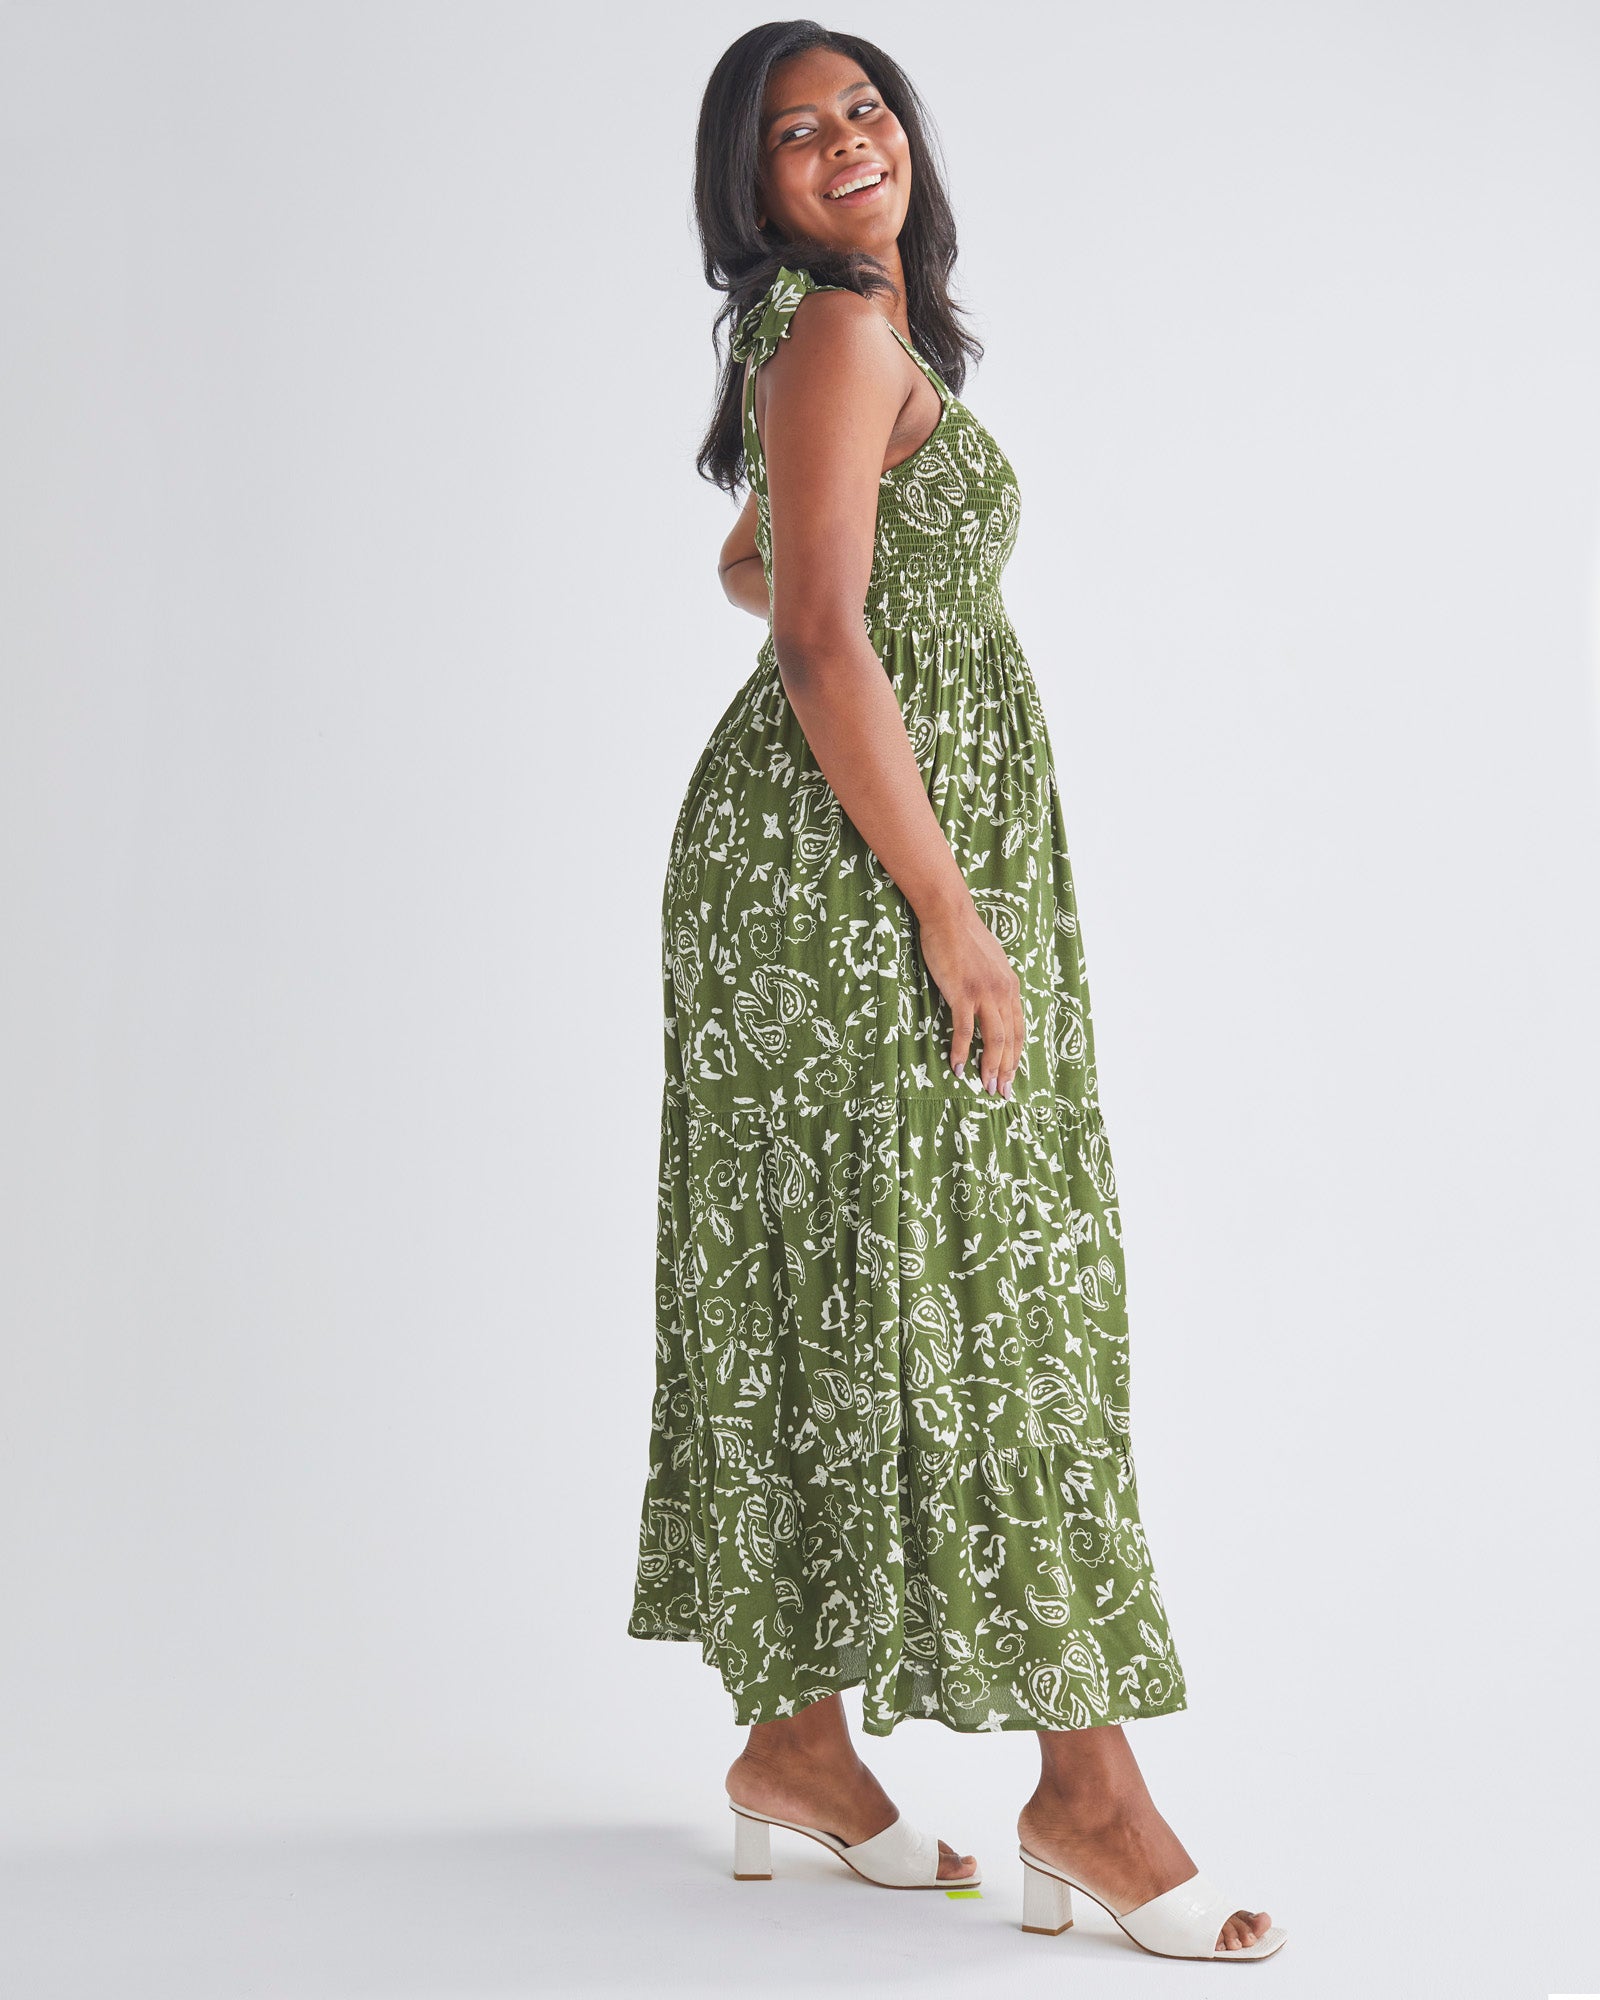 Side View - A Pregnant Woman Wearing Lilliana Maternity Green Dress in Paisley Print from Angel Maternity